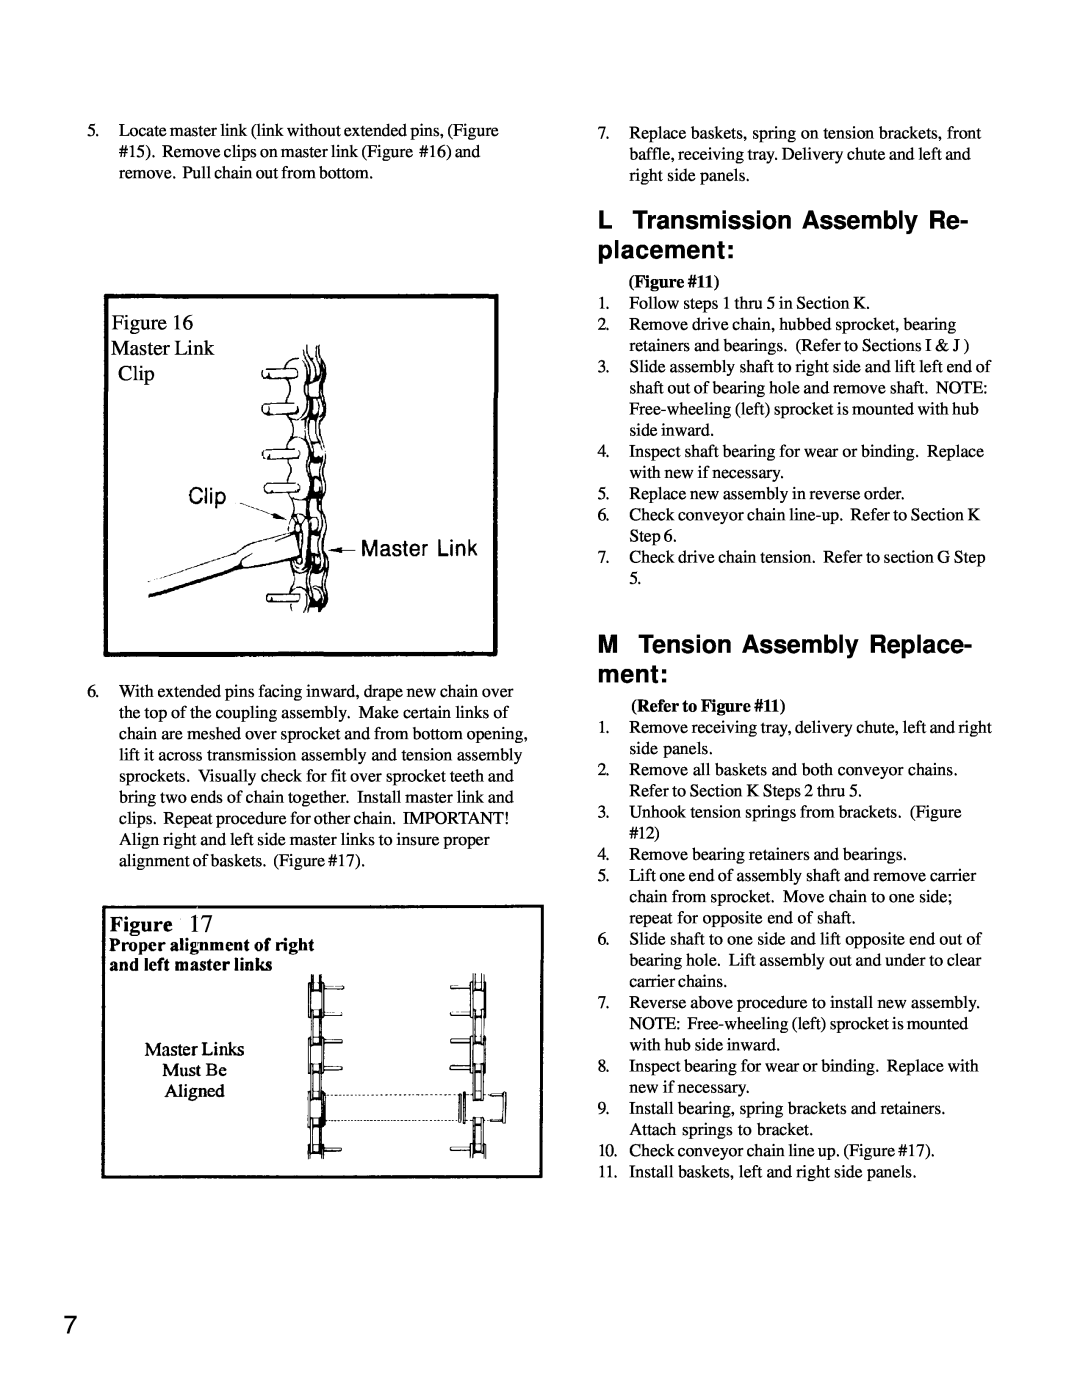 Merco Savory C-40 manual LTransmission Assembly Re- placement, MTension Assembly Replace- ment, Refer to Figure #11 